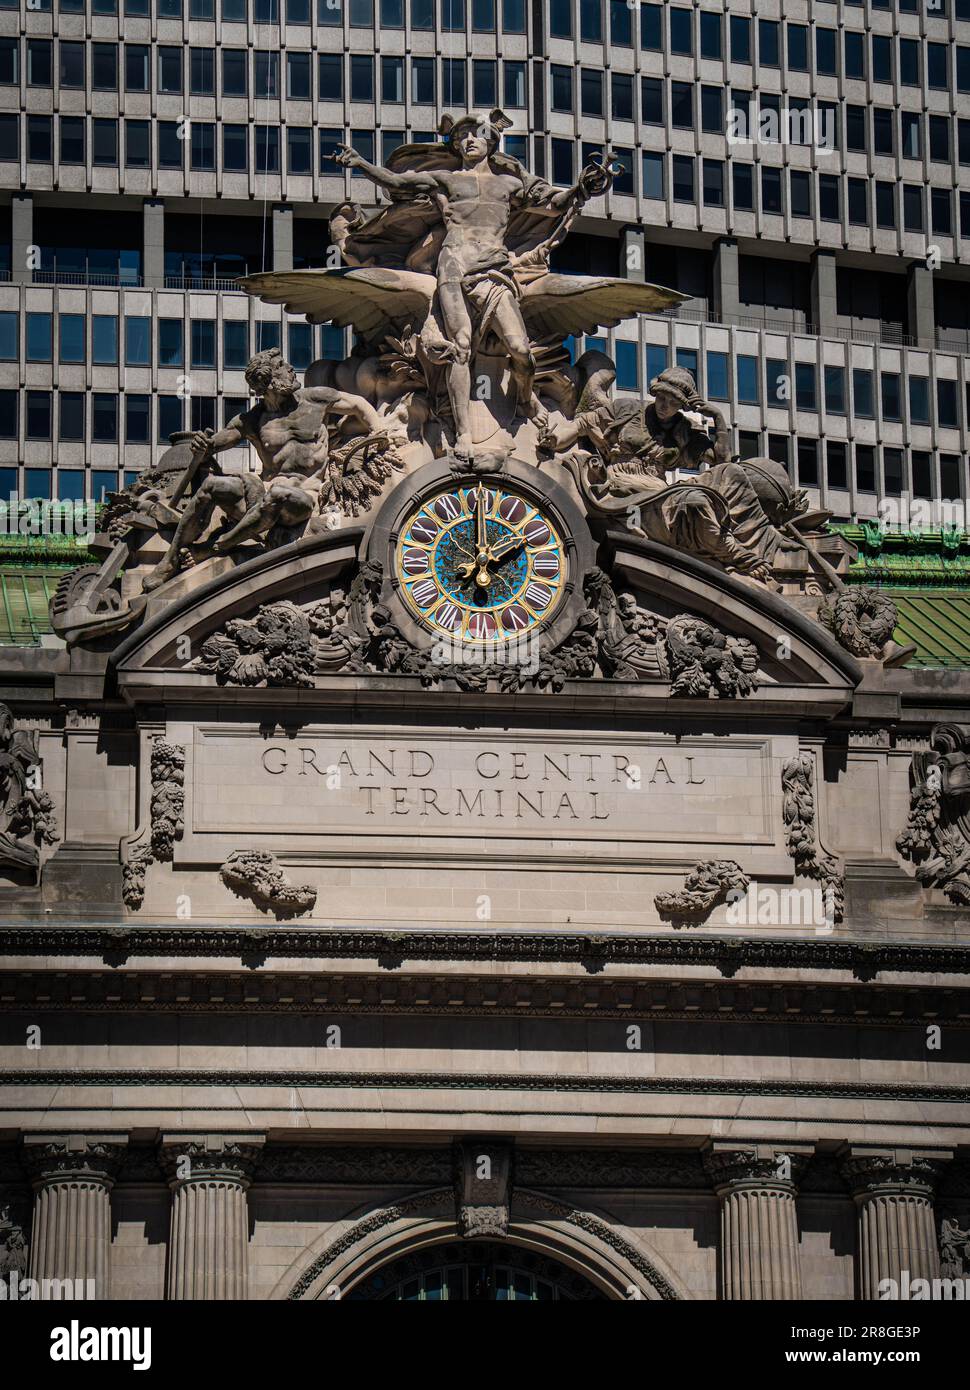 Mercury clock with Tiffany glass Grand Central Terminal in New York City. Stock Photo